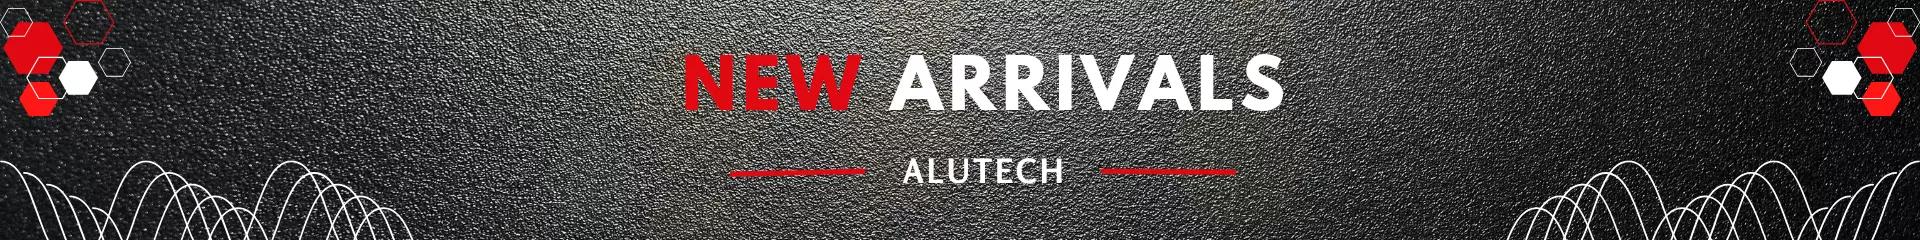 Alutech New Arrivals Banner Image